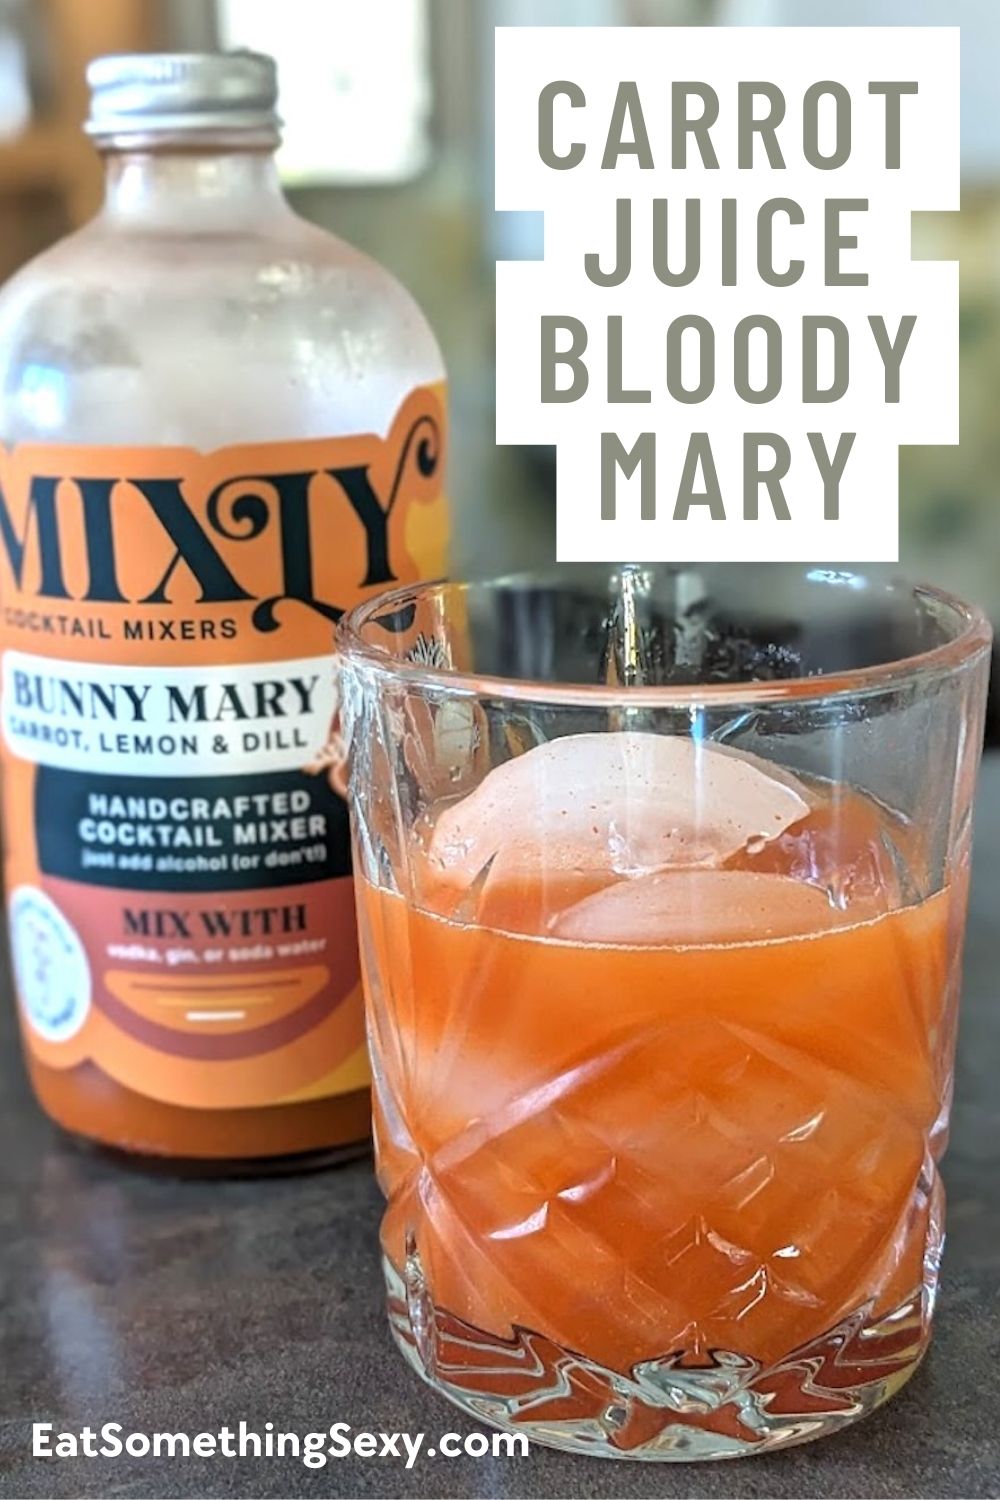 carrot juice bloody mary graphic